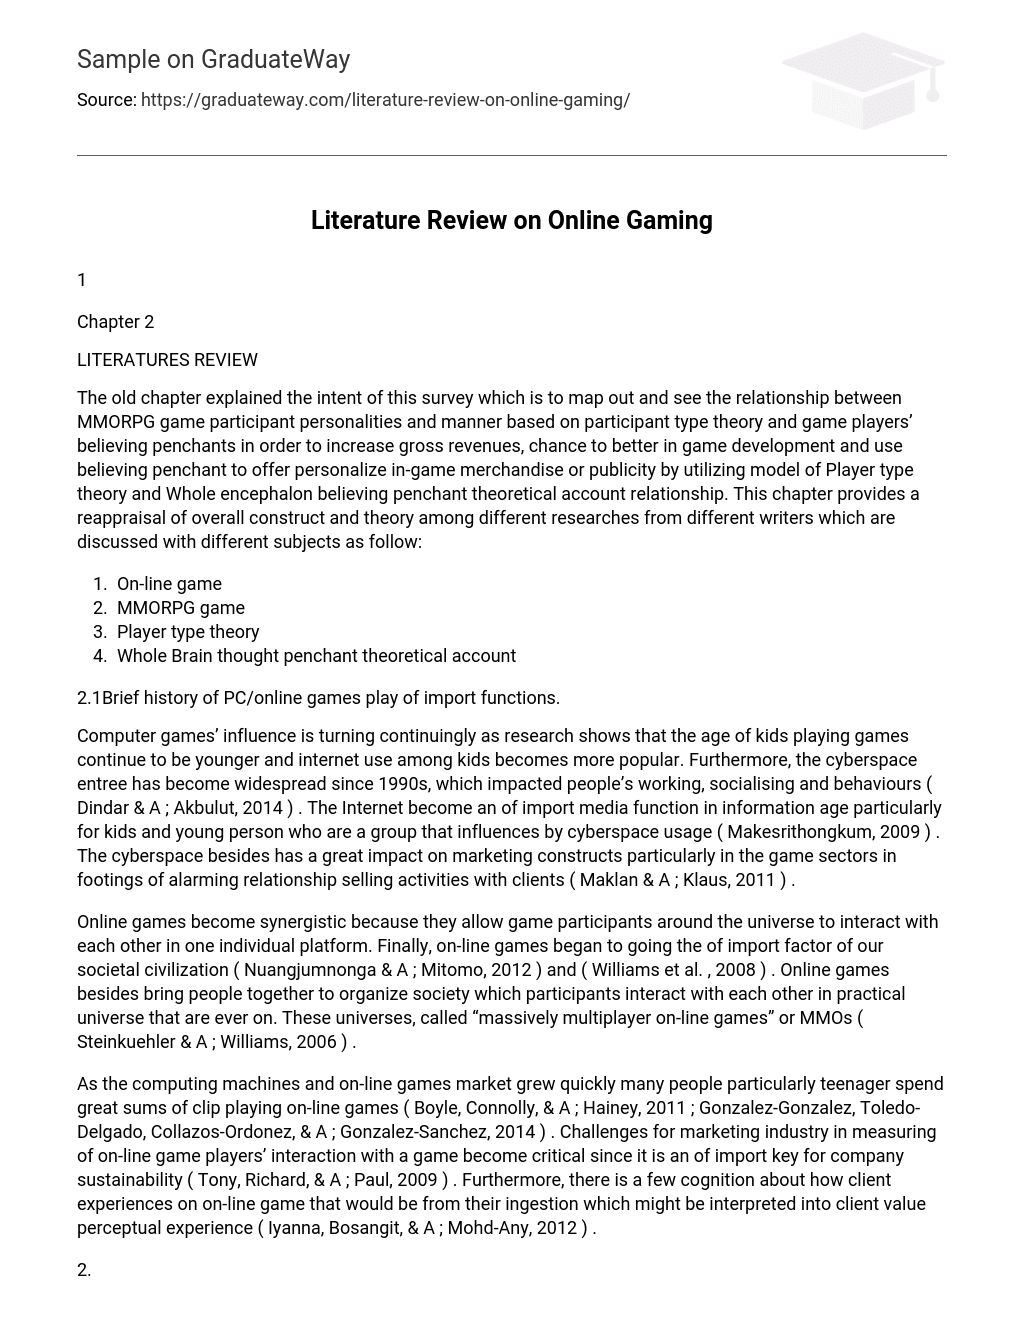 Literature Review on Online Gaming